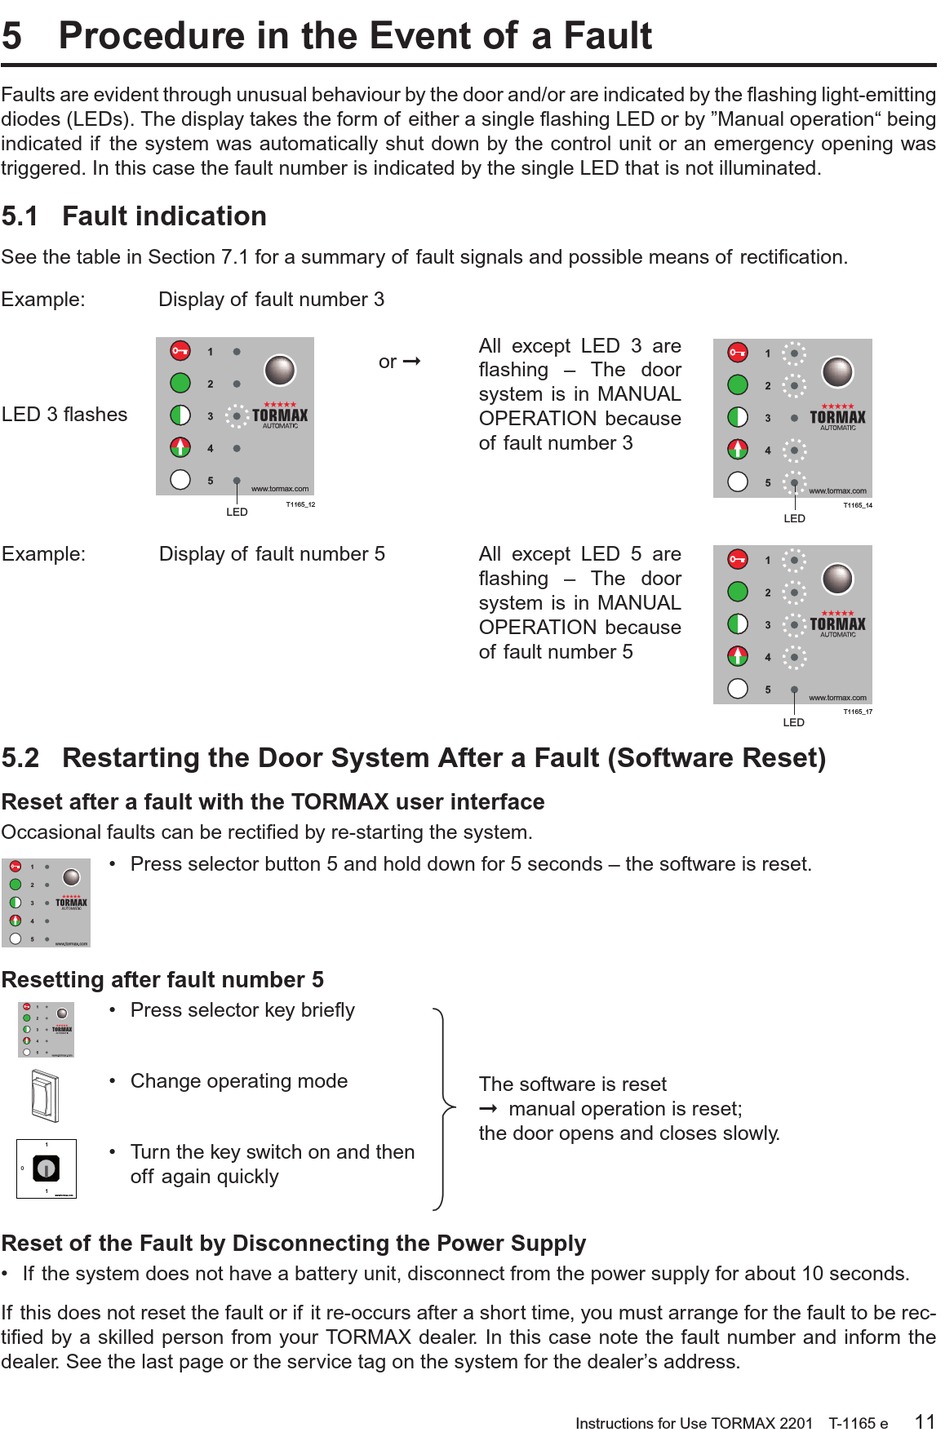 faillissement streng Uitroepteken Procedure In The Event Of A Fault; Fault Indication; Restarting The Door  System After A Fault (Software Reset) - Tormax Automatic TORMAX 2201  Instructions For Use Manual [Page 11] | ManualsLib